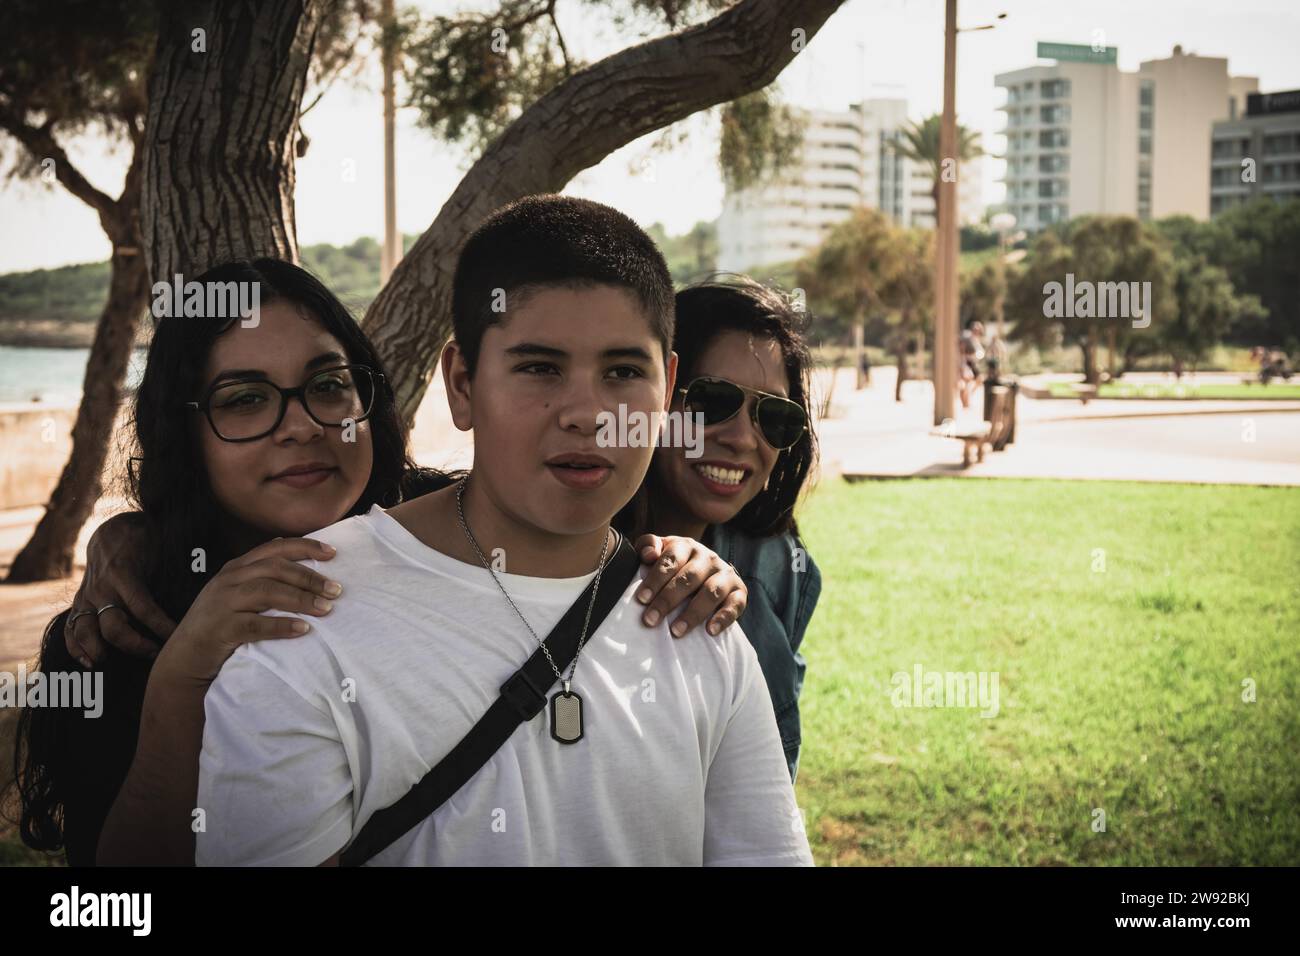 Cheerful group of young Latinos smiling at the camera in the open air, family portrait on a sunny day in the open air park Stock Photo